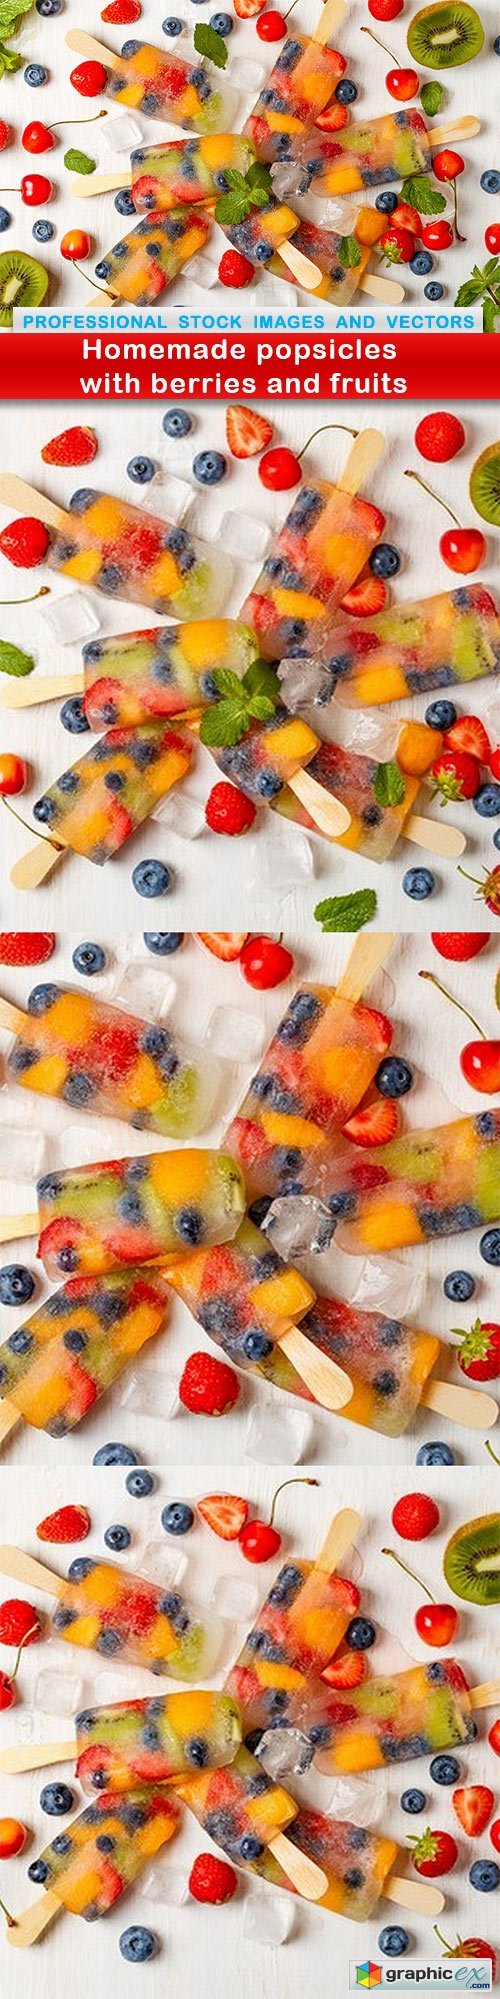 Homemade popsicles with berries and fruits - 4 UHQ JPEG